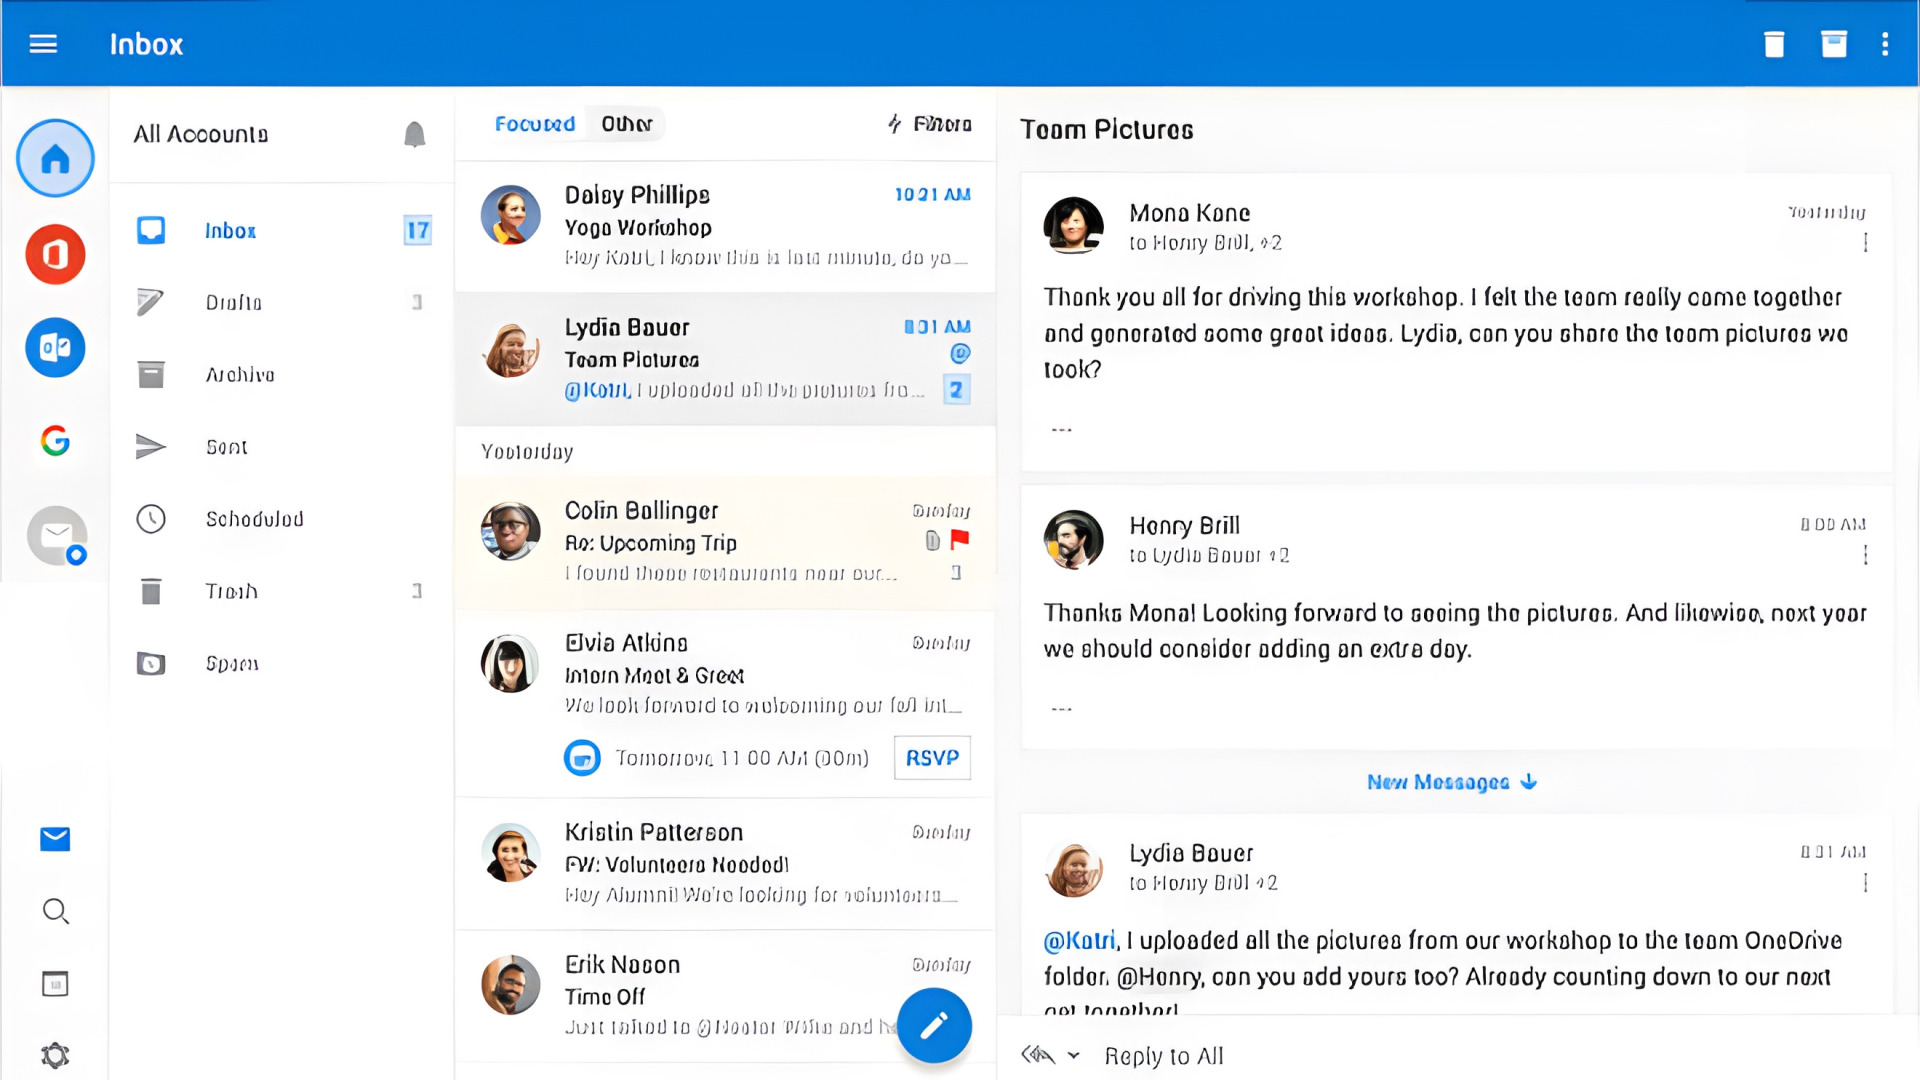 Microsoft Outlook APK-Download – Mail-Client für Android